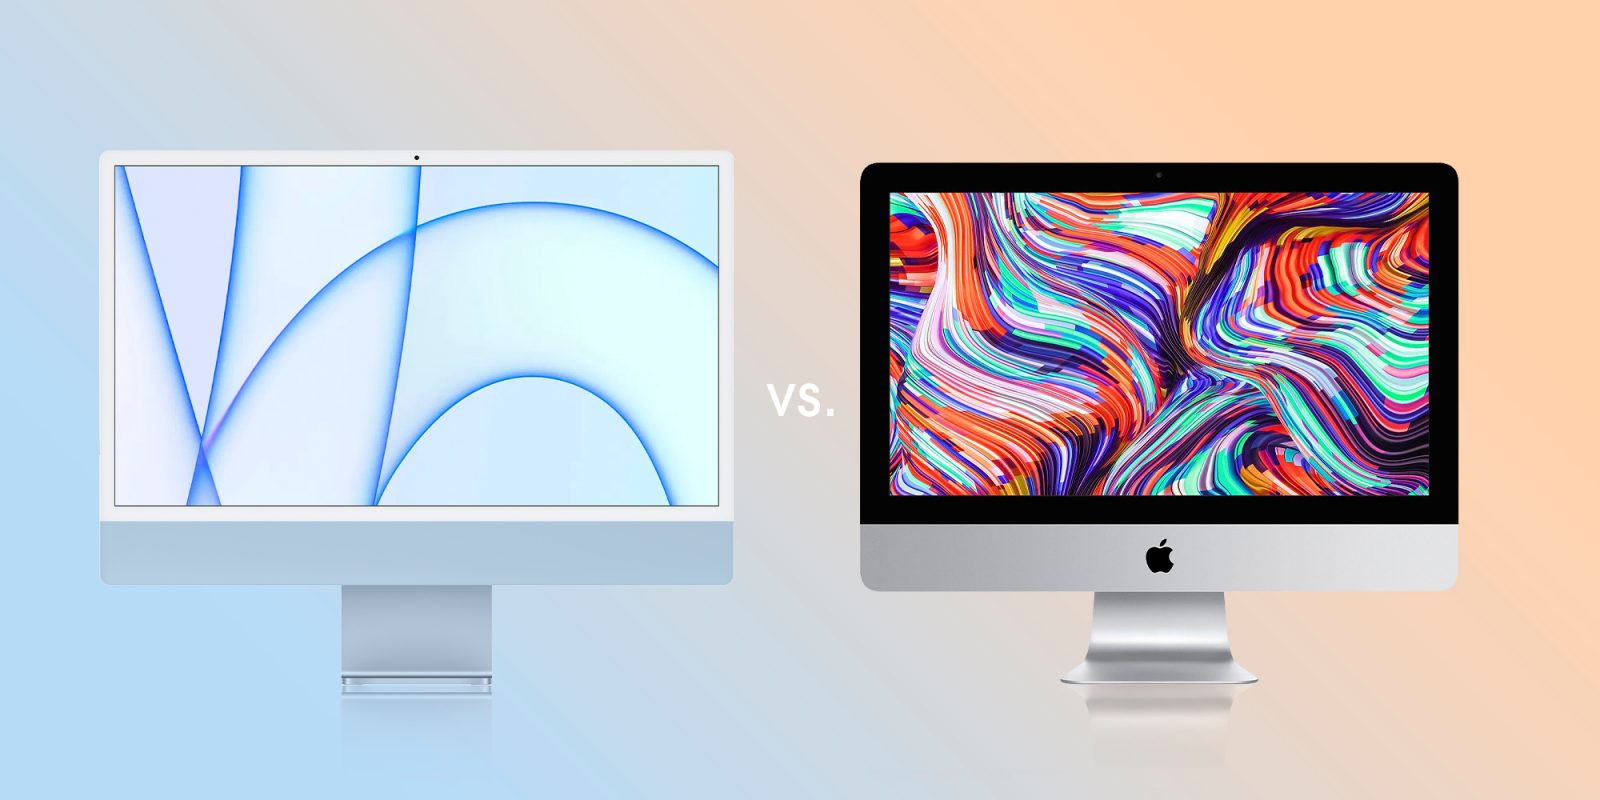 Video tips for making the most of Apple's colorful M1 iMac computer